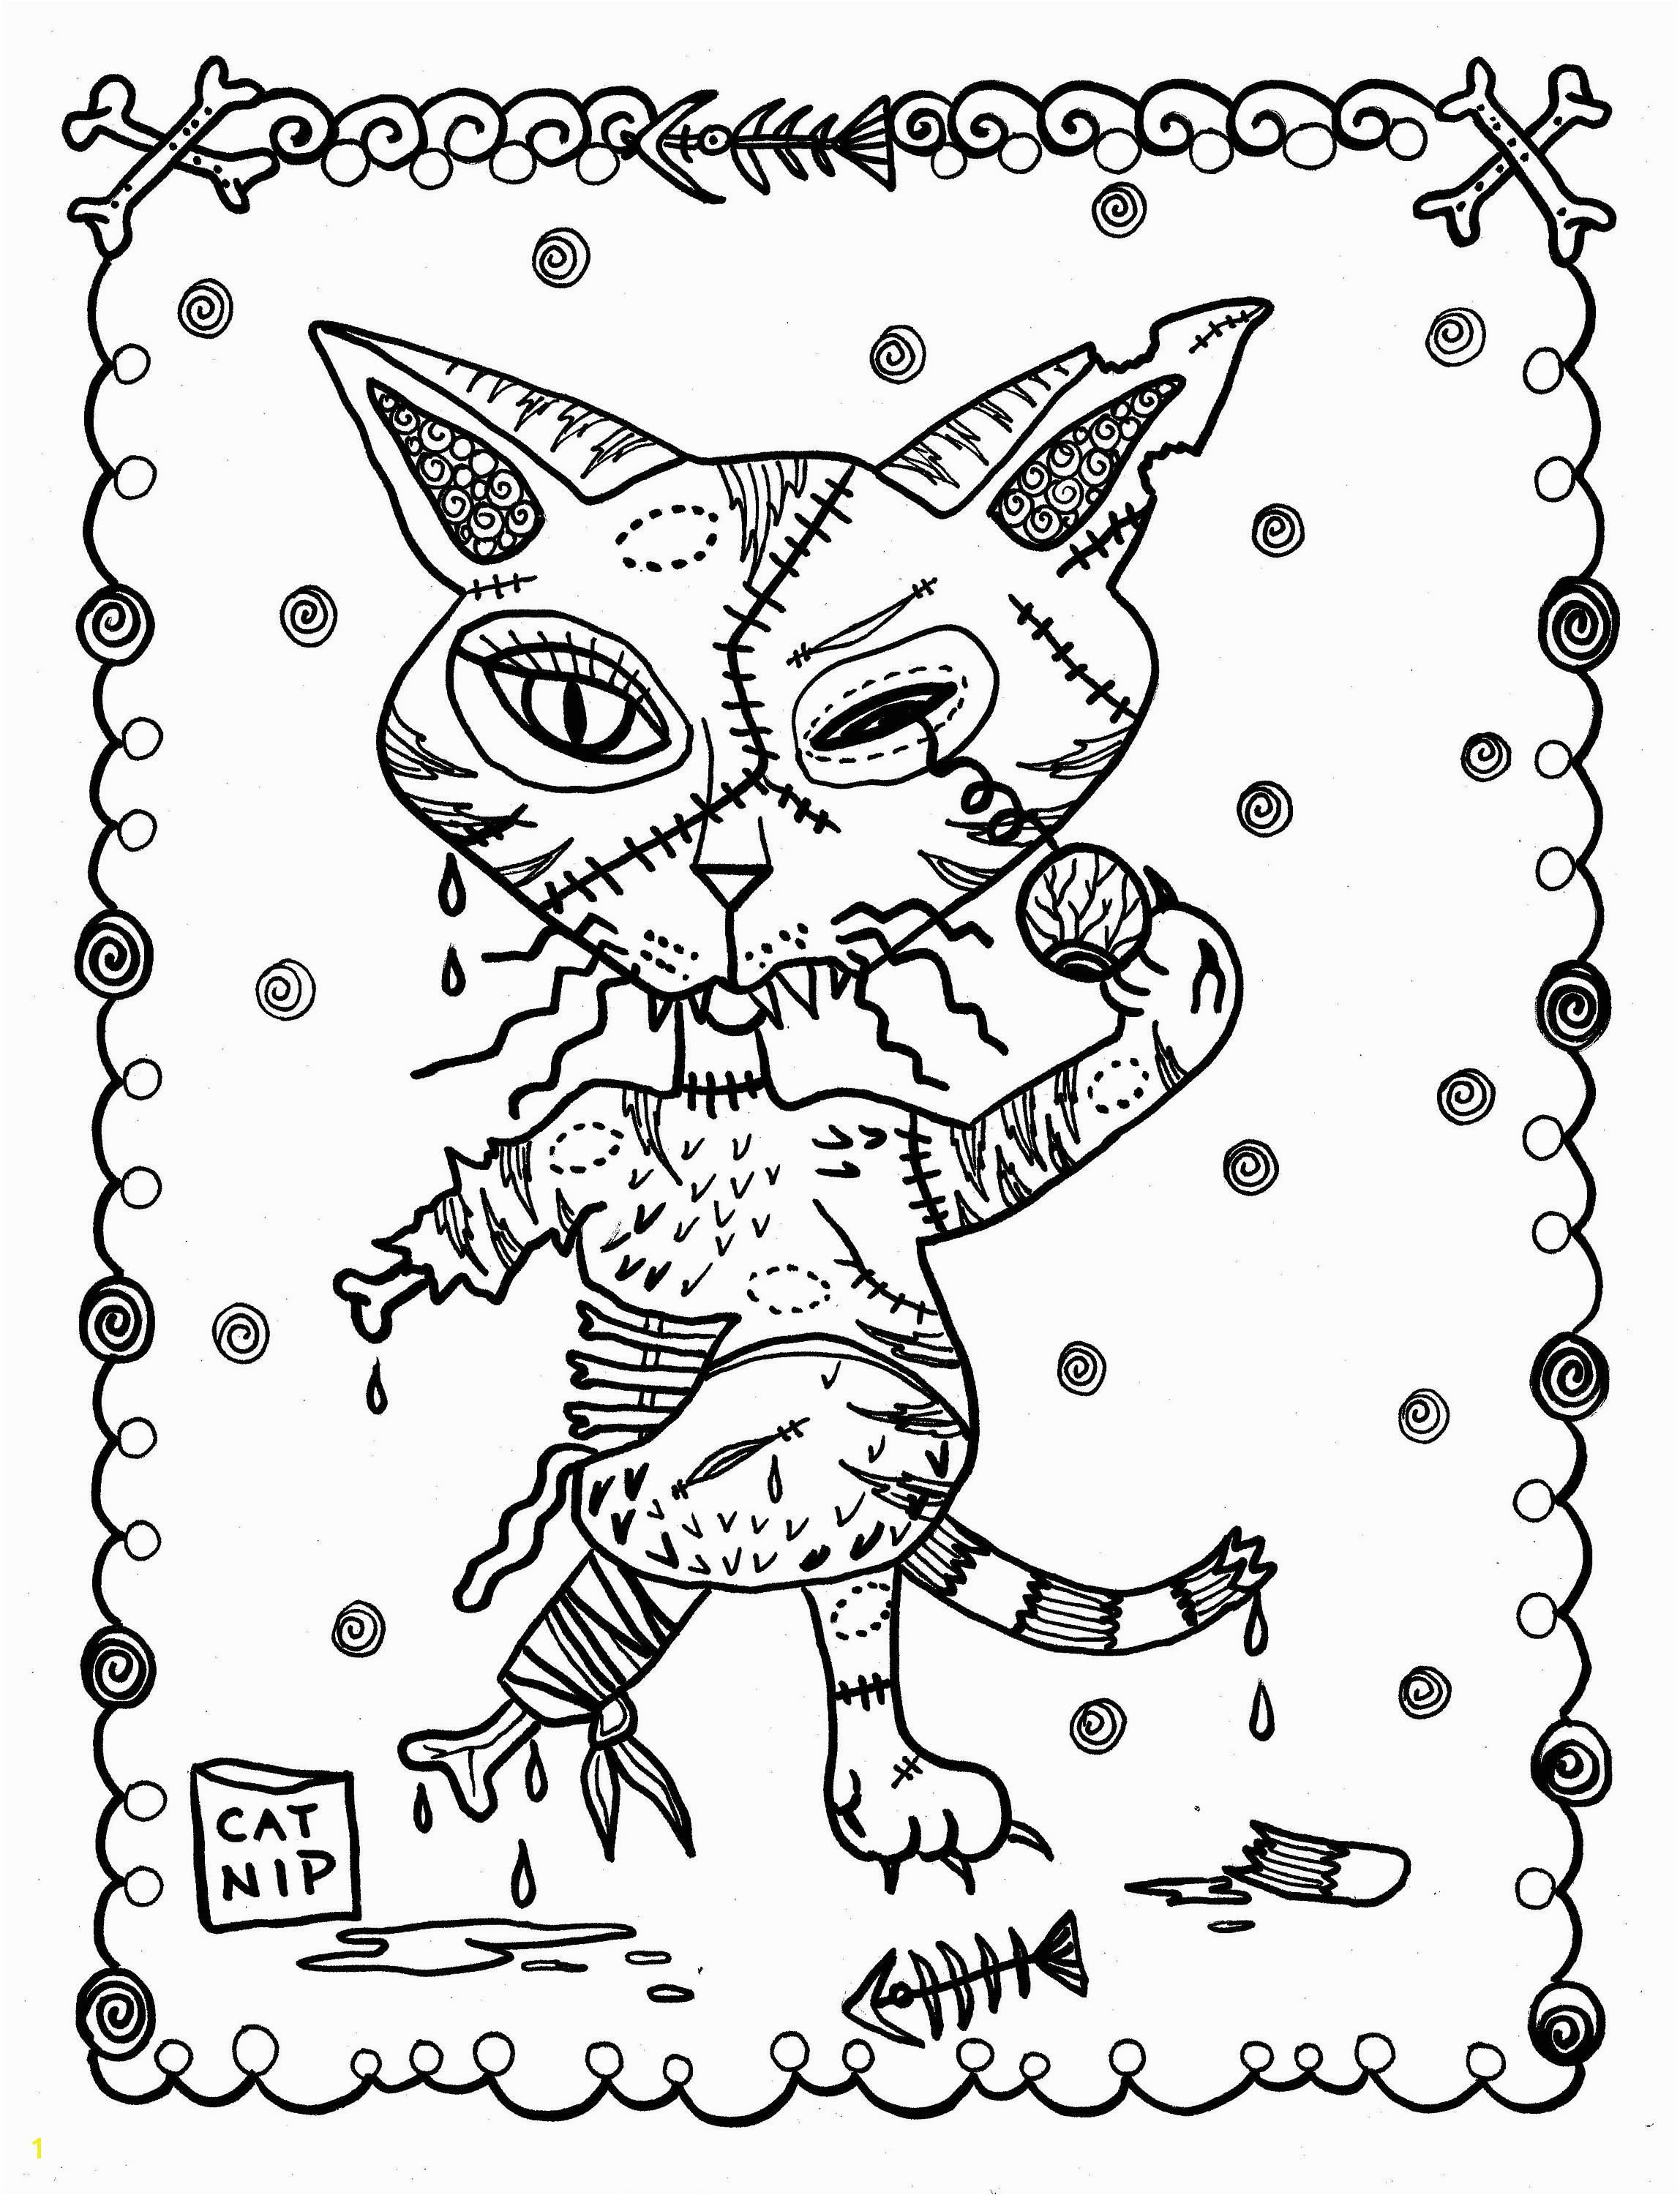 Puppy Halloween Coloring Pages 5 Pages Fantasy Cats Instant S Scarry Halloween Coloring